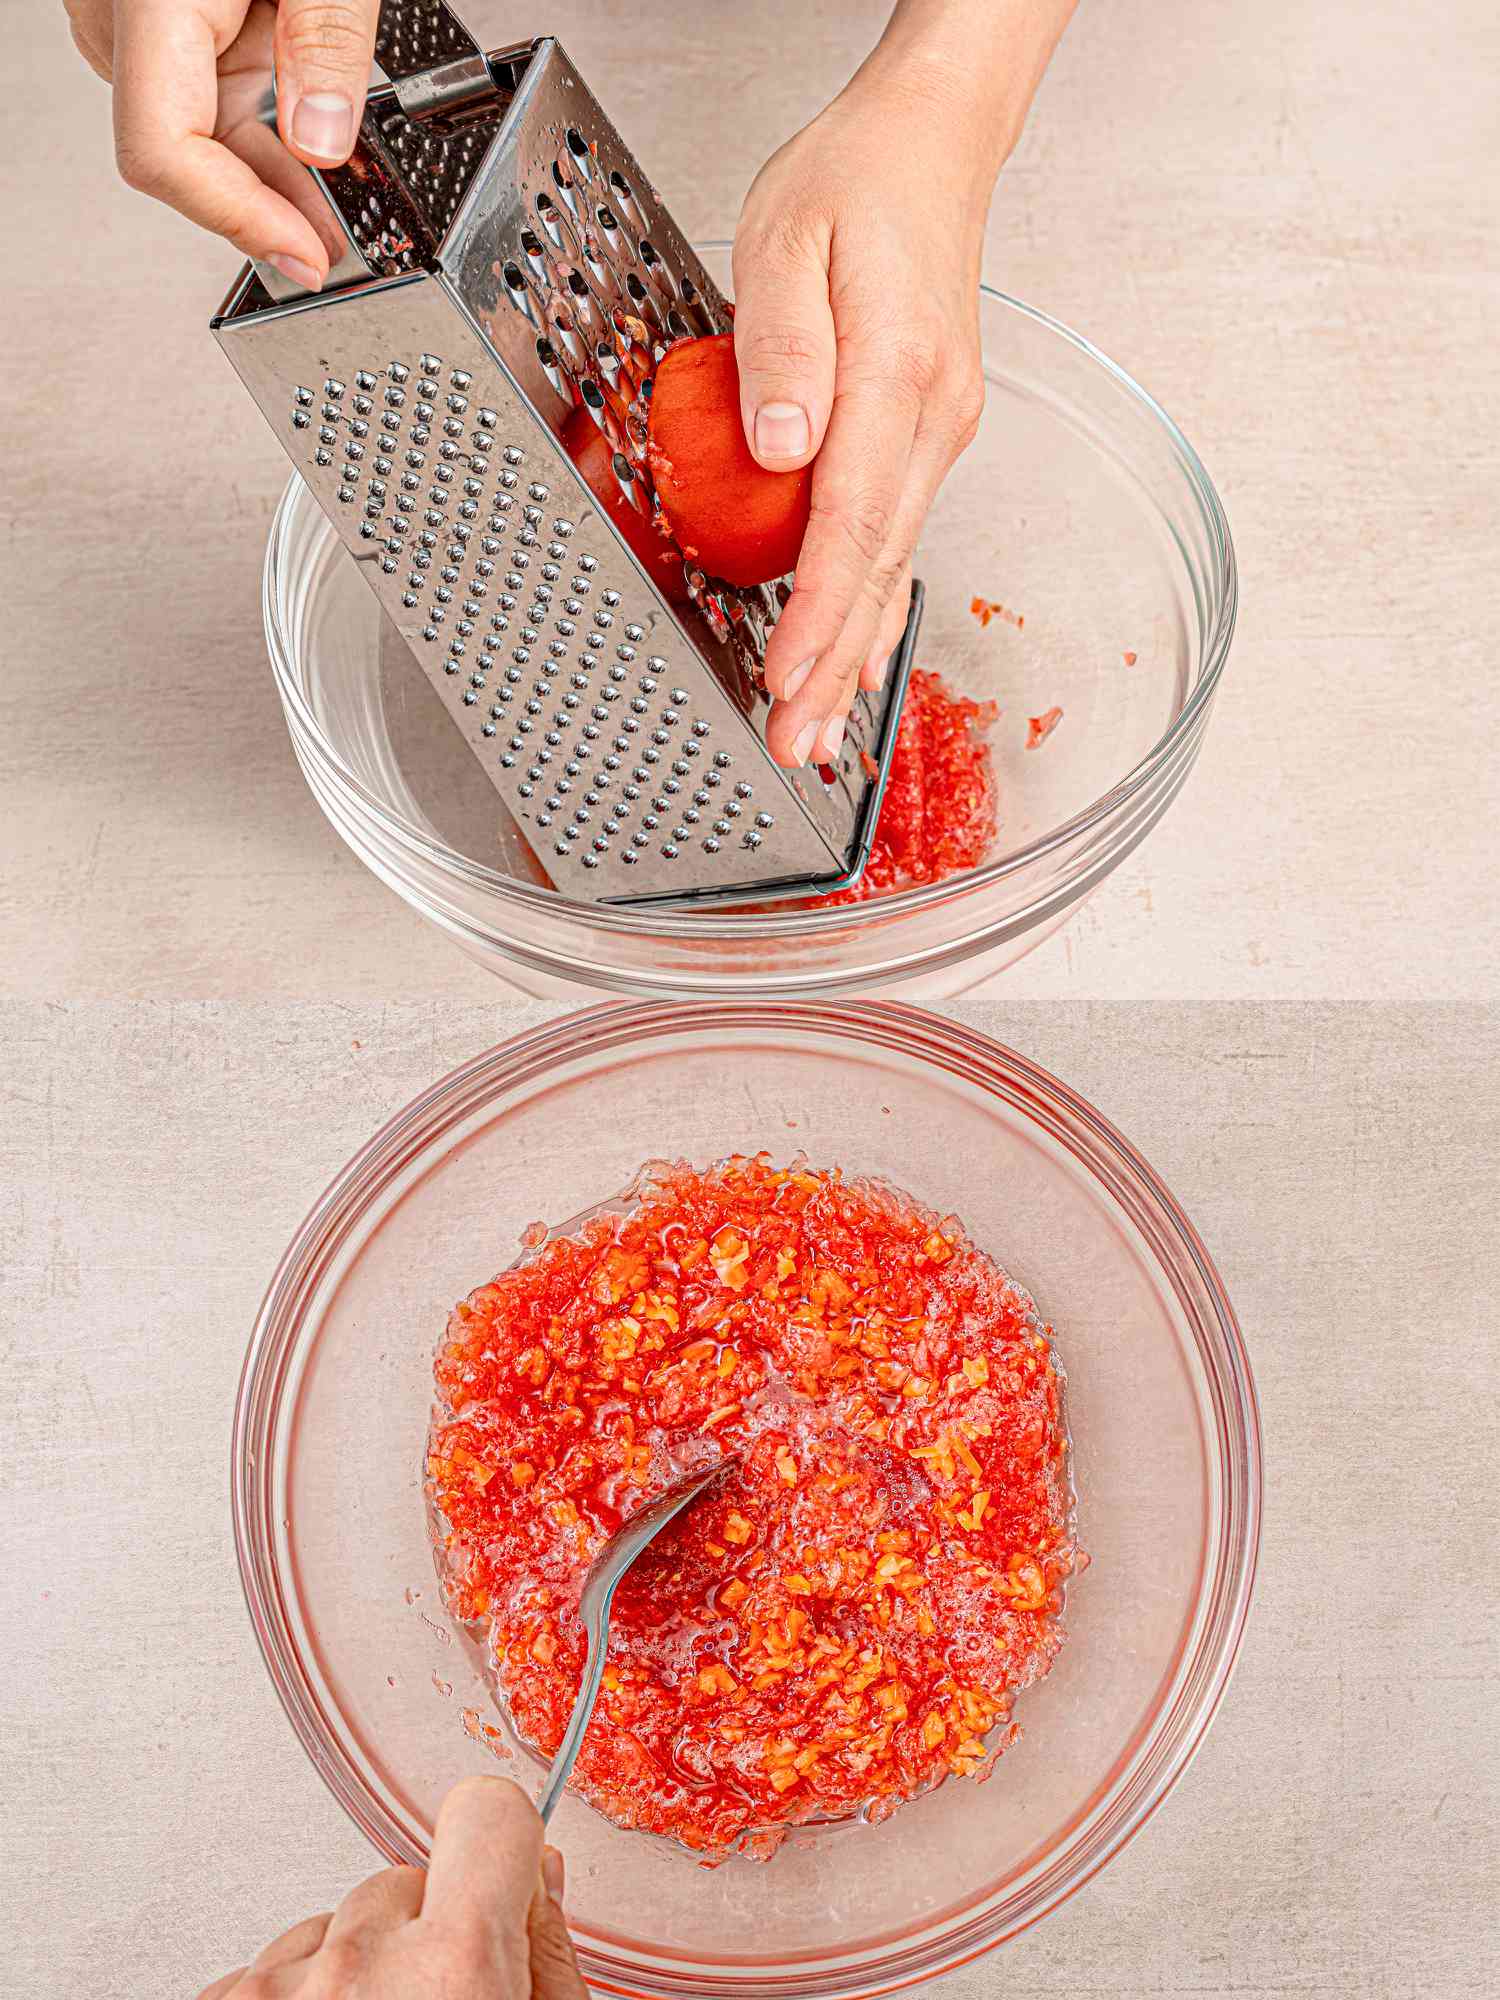 Two image collage of grating tomato on a box grater into a glass bowl then stirring with a spoon